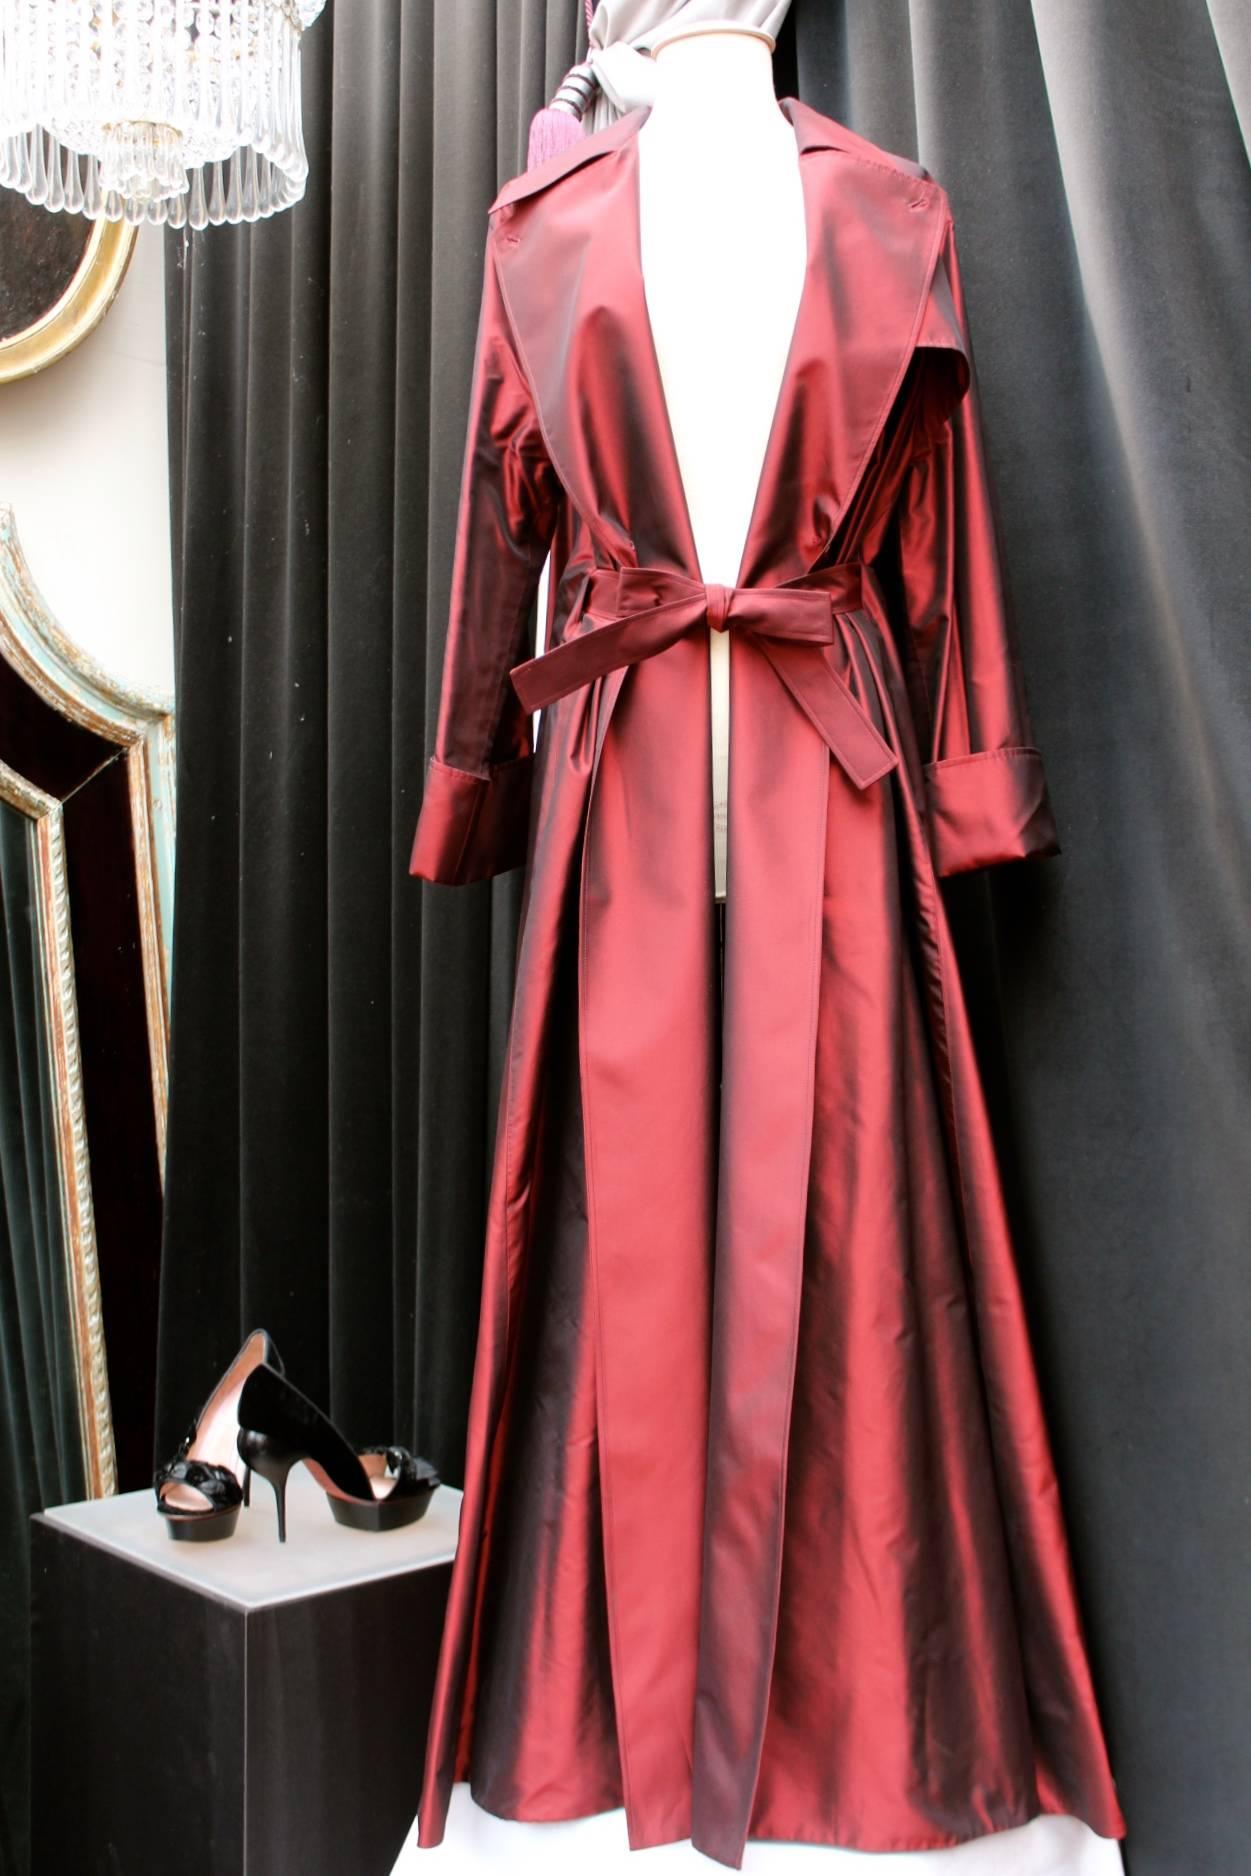 GUY LAROCHE COLLECTION (Paris) Large oversize trench coat in burgundy taffeta fastened with two buttons and a belt of the same fabric. 

The belt goes underneath the trench in the back allowing to show a very dramatic back profile. 

Very good